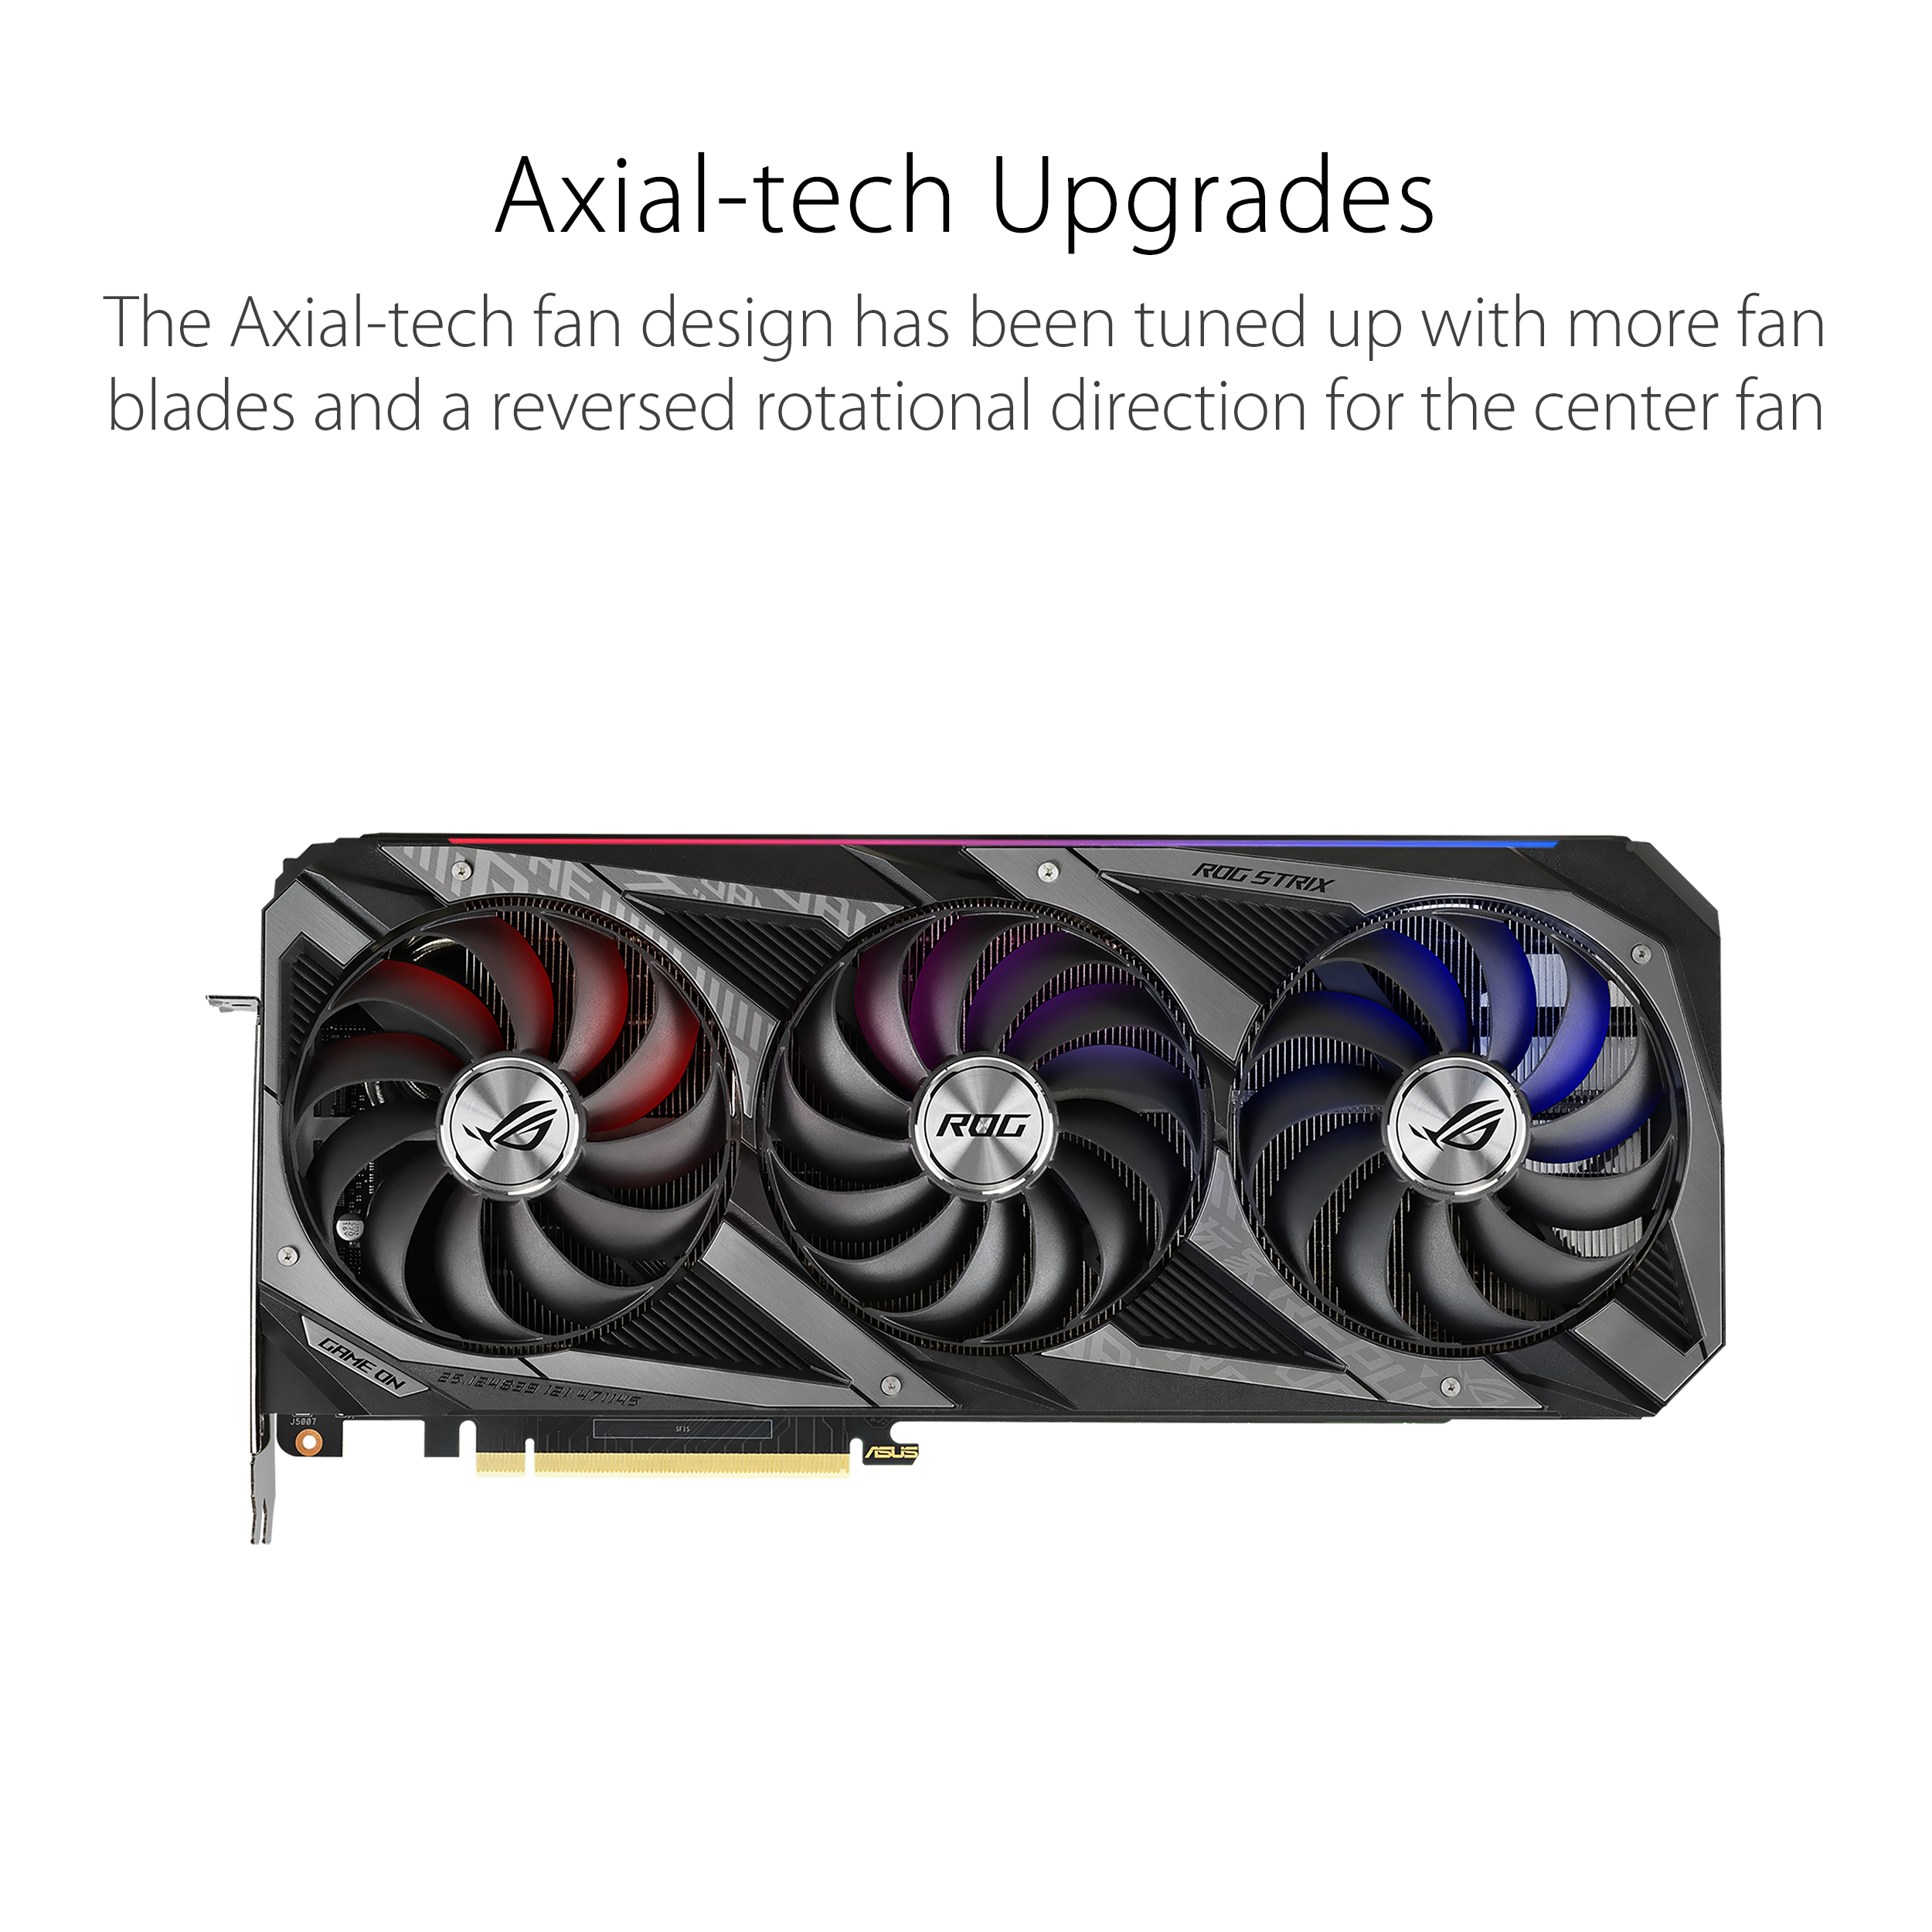 A large marketing image providing additional information about the product Asus GeForce RTX 3060 Ti ROG Strix Gaming OC 8GB GDDR6 - Additional alt info not provided